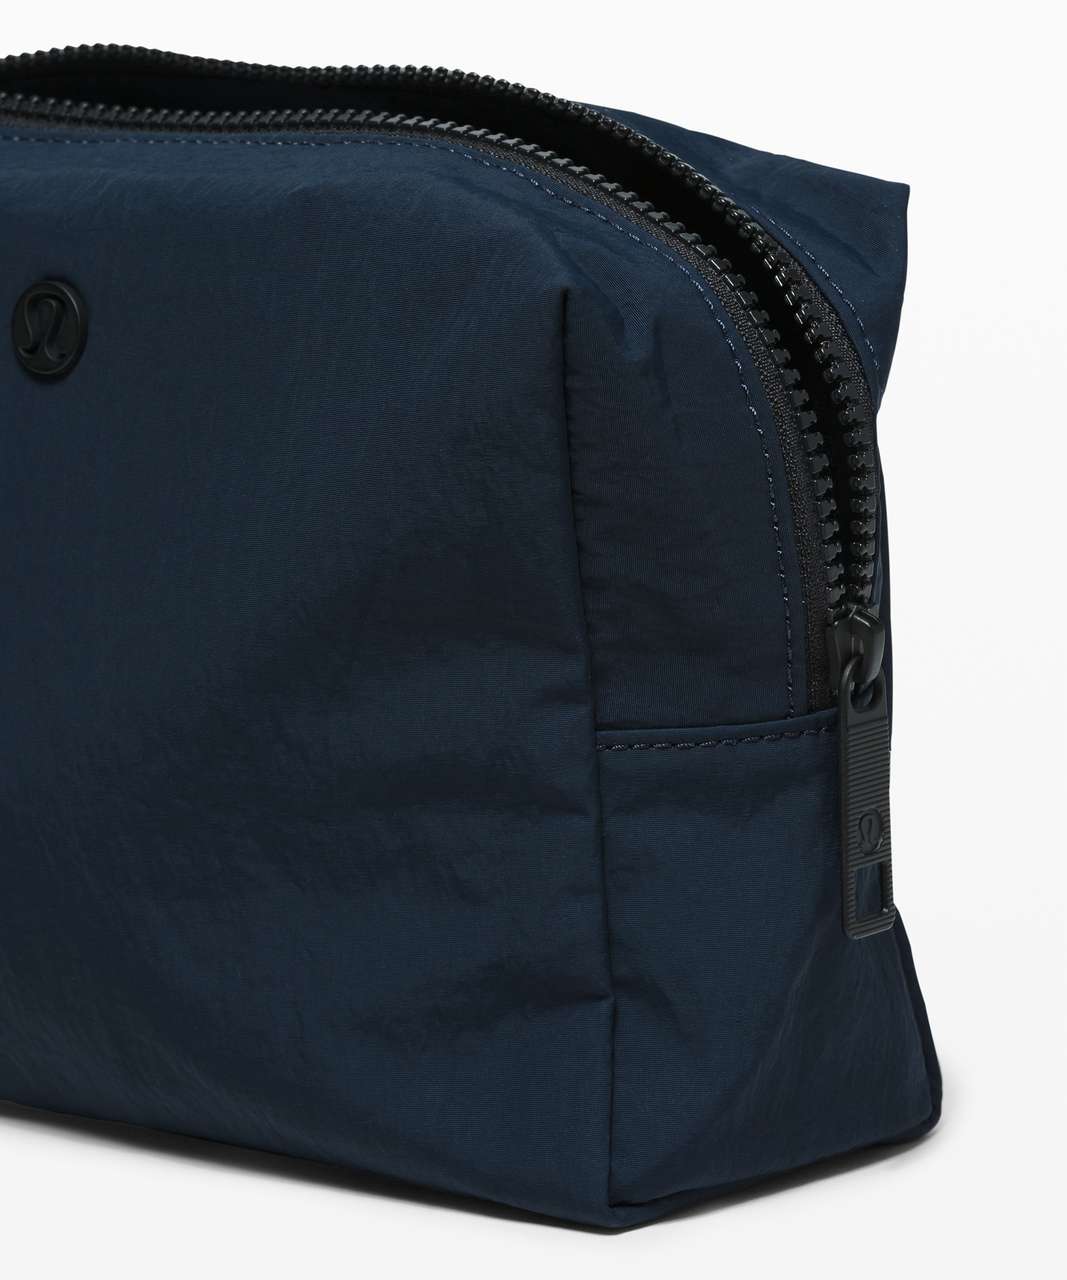 Lululemon All Your Small Things Pouch *4L - True Navy